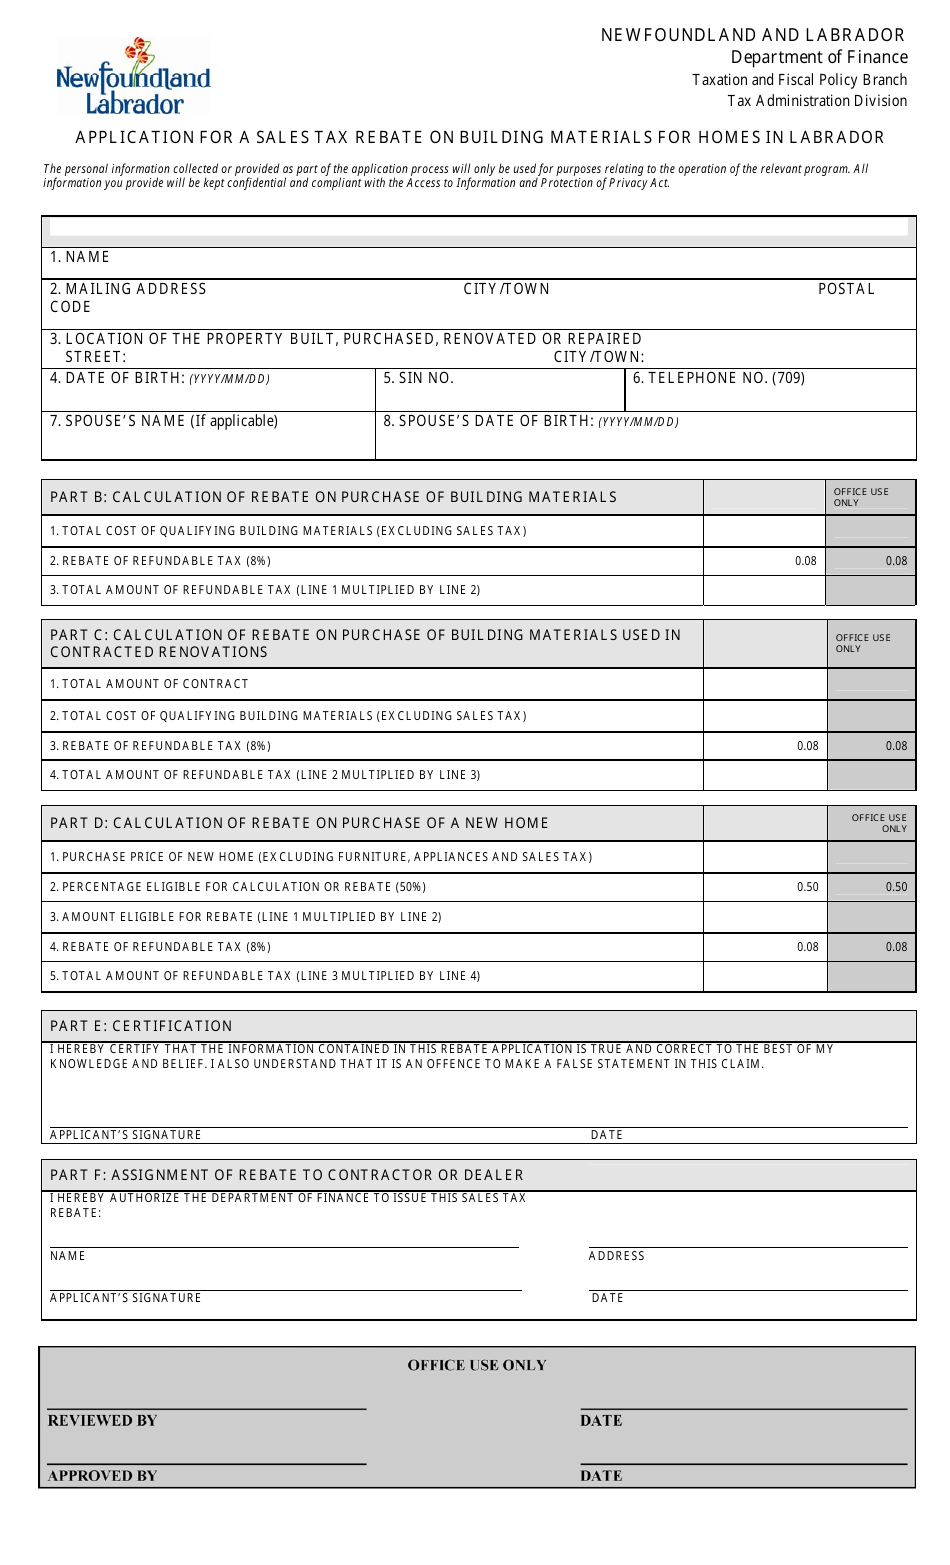 Application for a Sales Tax Rebate on Building Materials for Homes in Labrador - Newfoundland and Labrador, Canada, Page 1